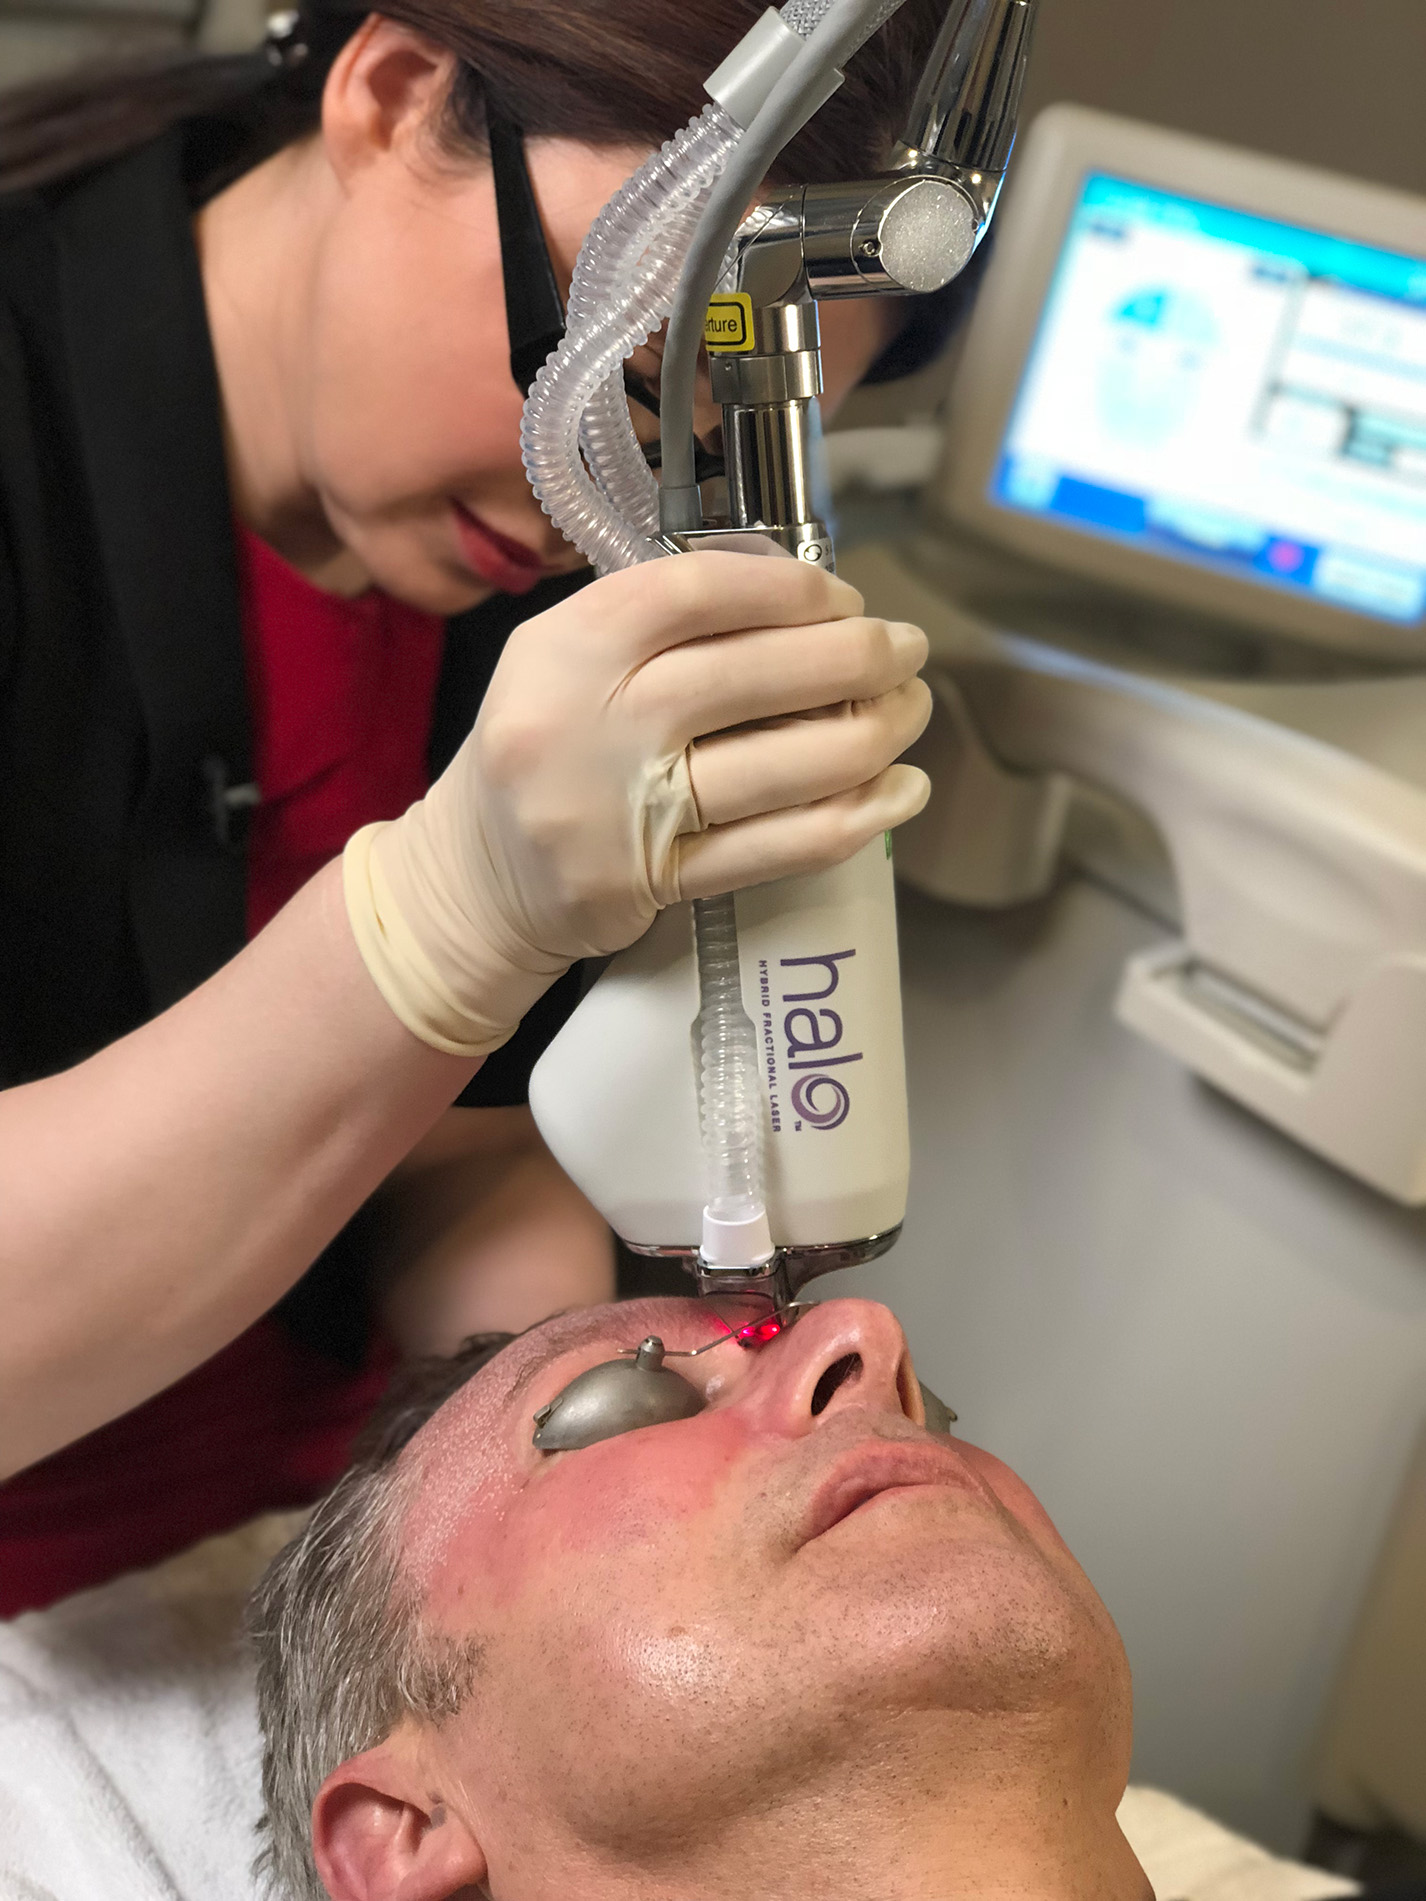 HALO Laser being used between a man's eyes to reduce aging and wrinkles at Capizzi MD.